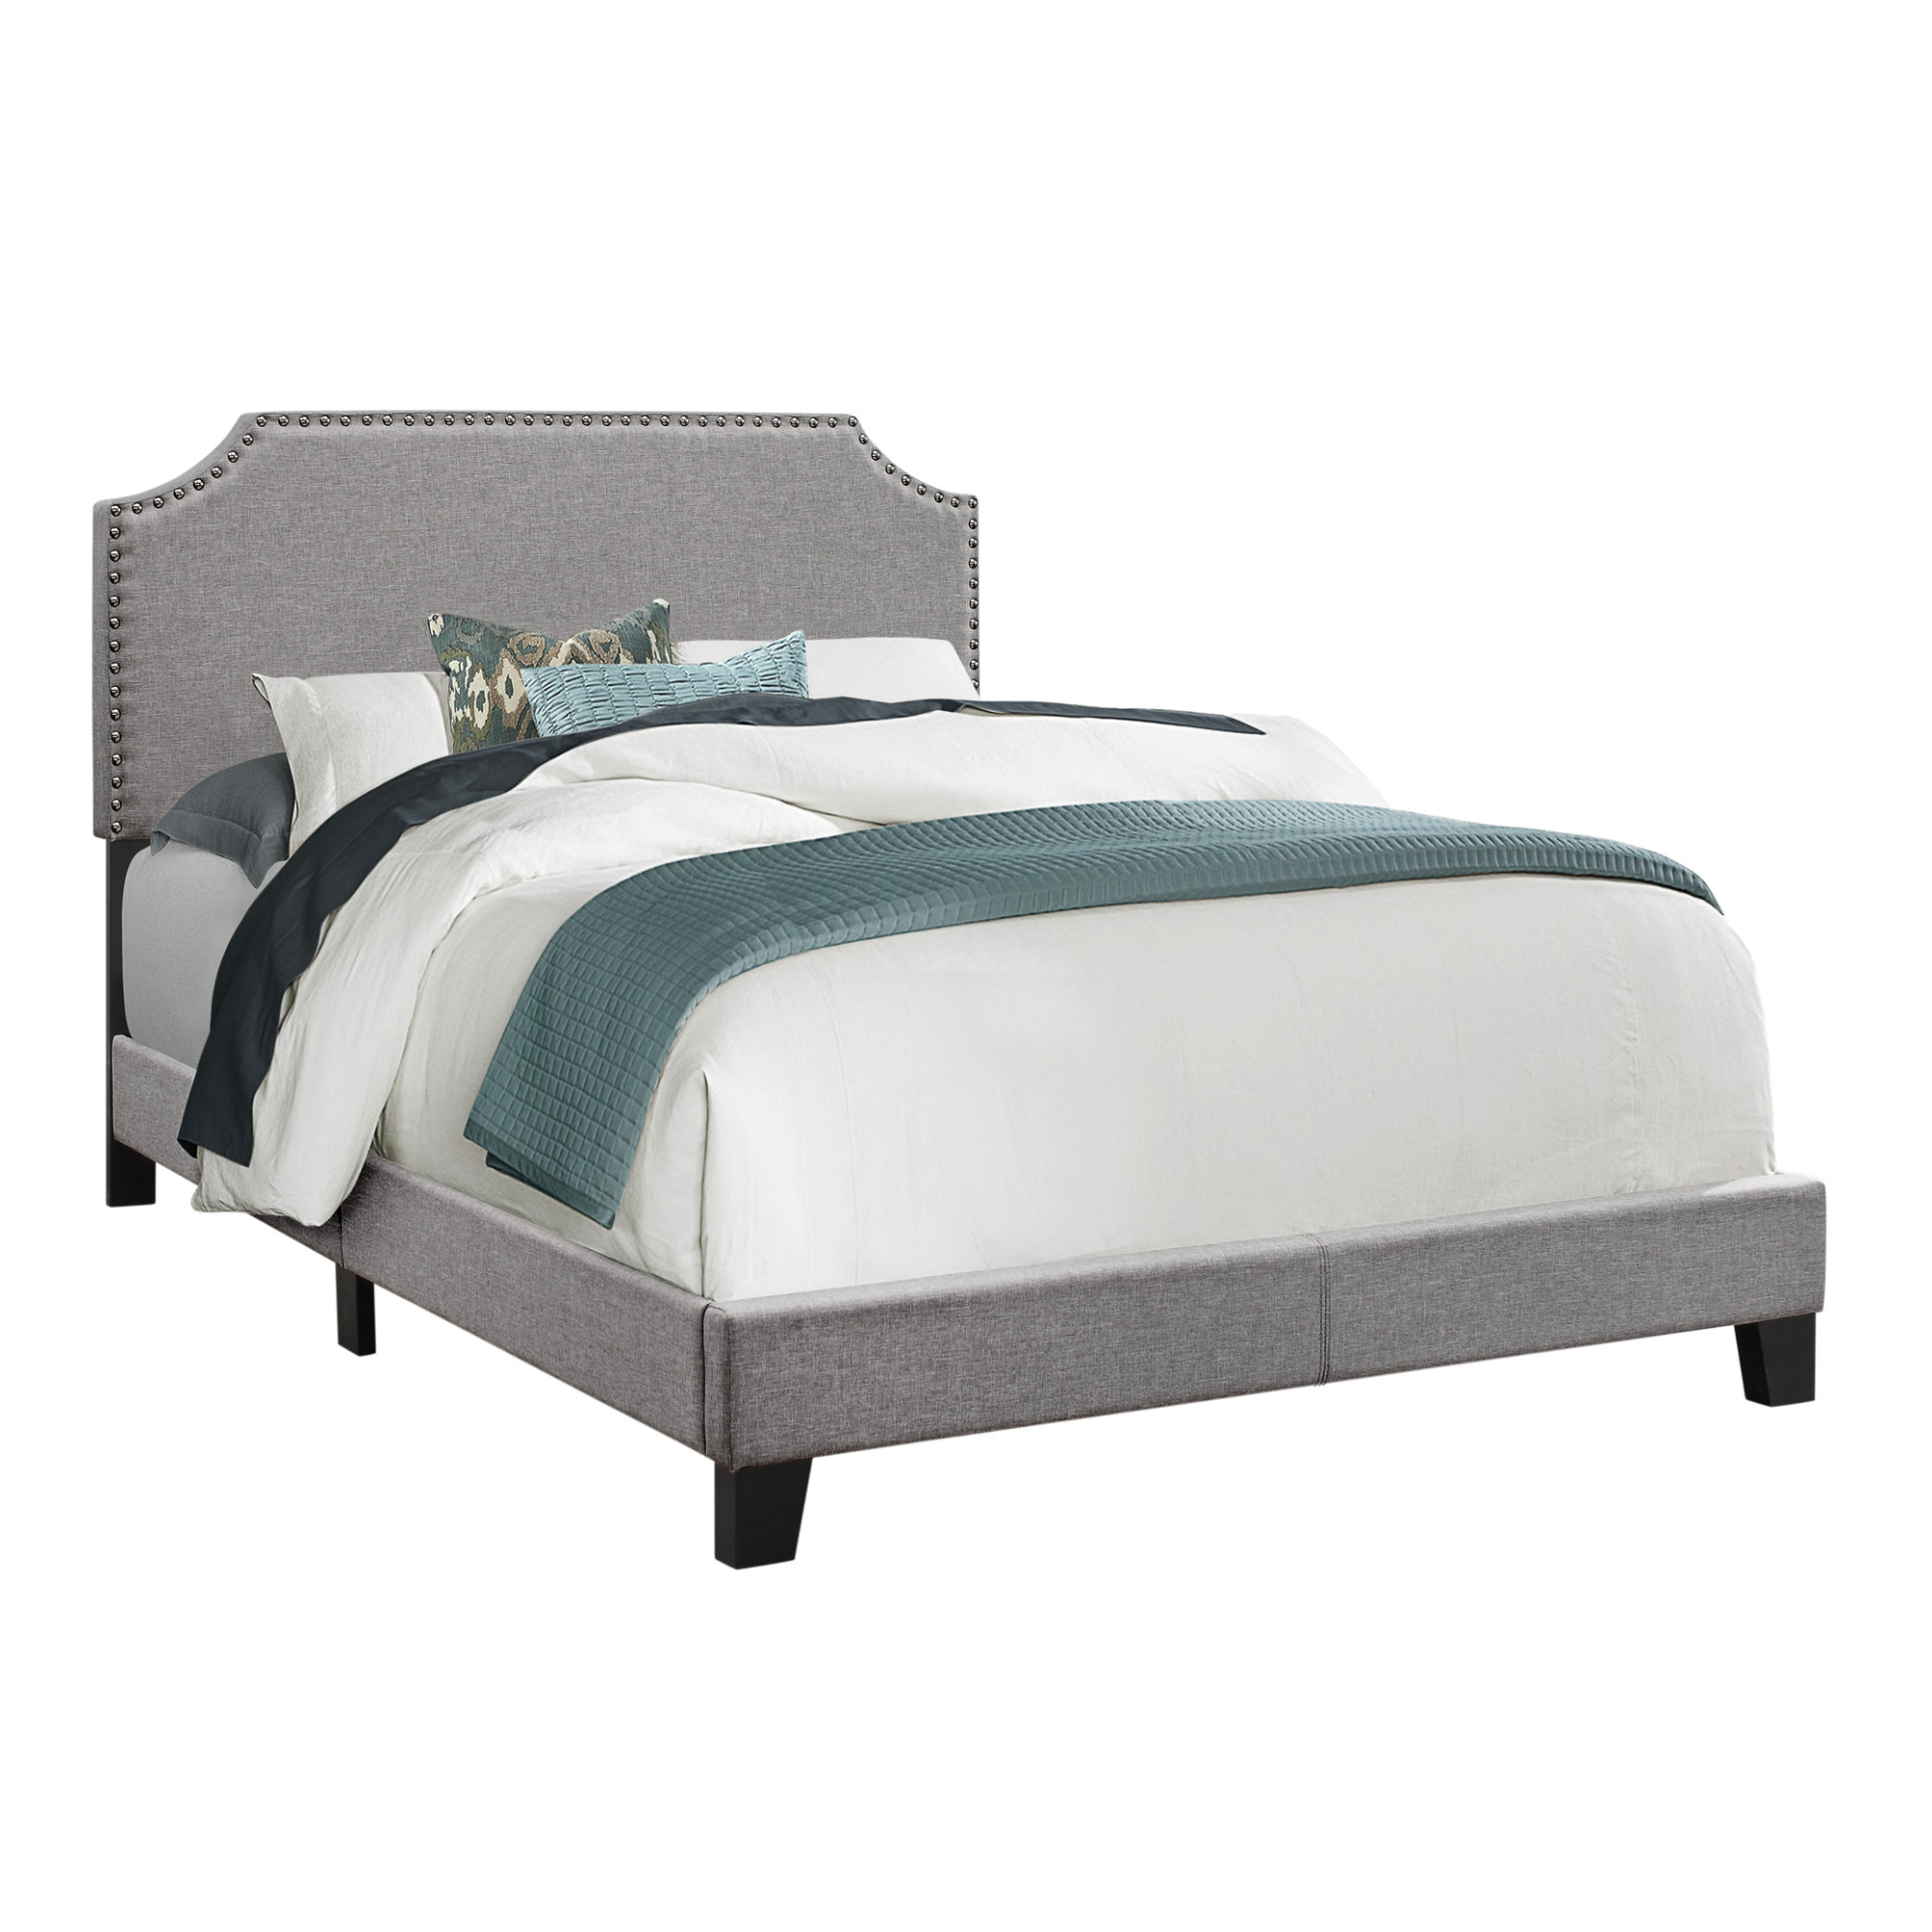 BED - FULL SIZE / GREY LINEN WITH CHROME TRIM